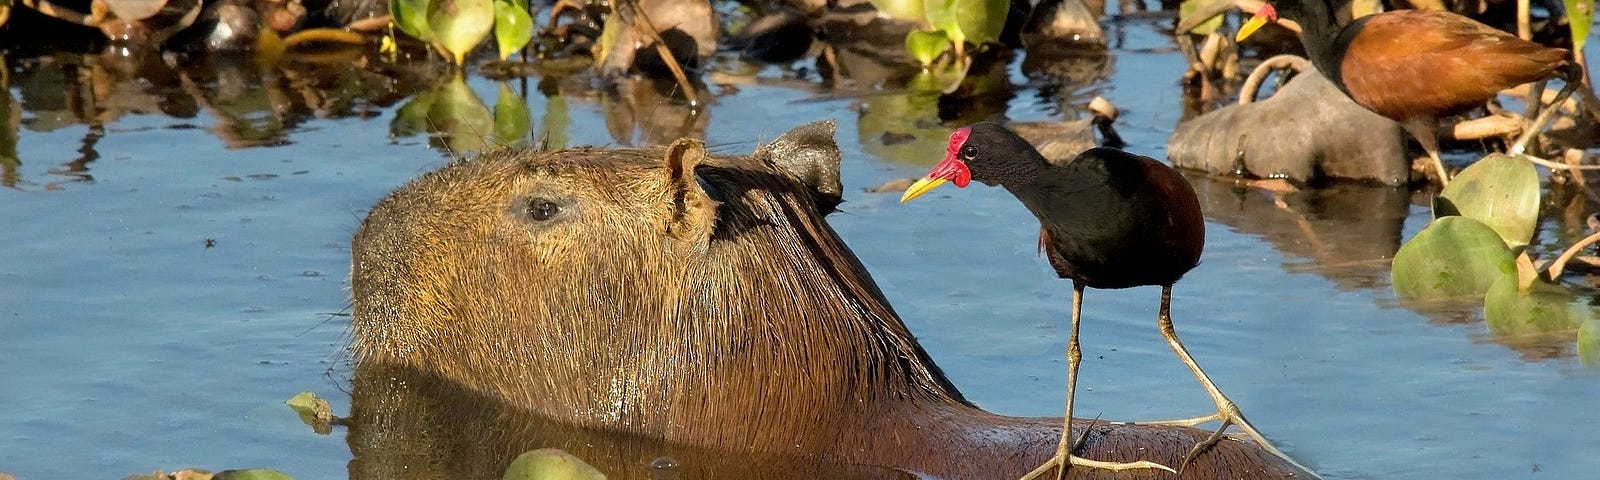 Capybara swimming in water with its back just visible above the waterline. A long-legged wading bird is standing on its back. The capybara looks very relaxed about this.